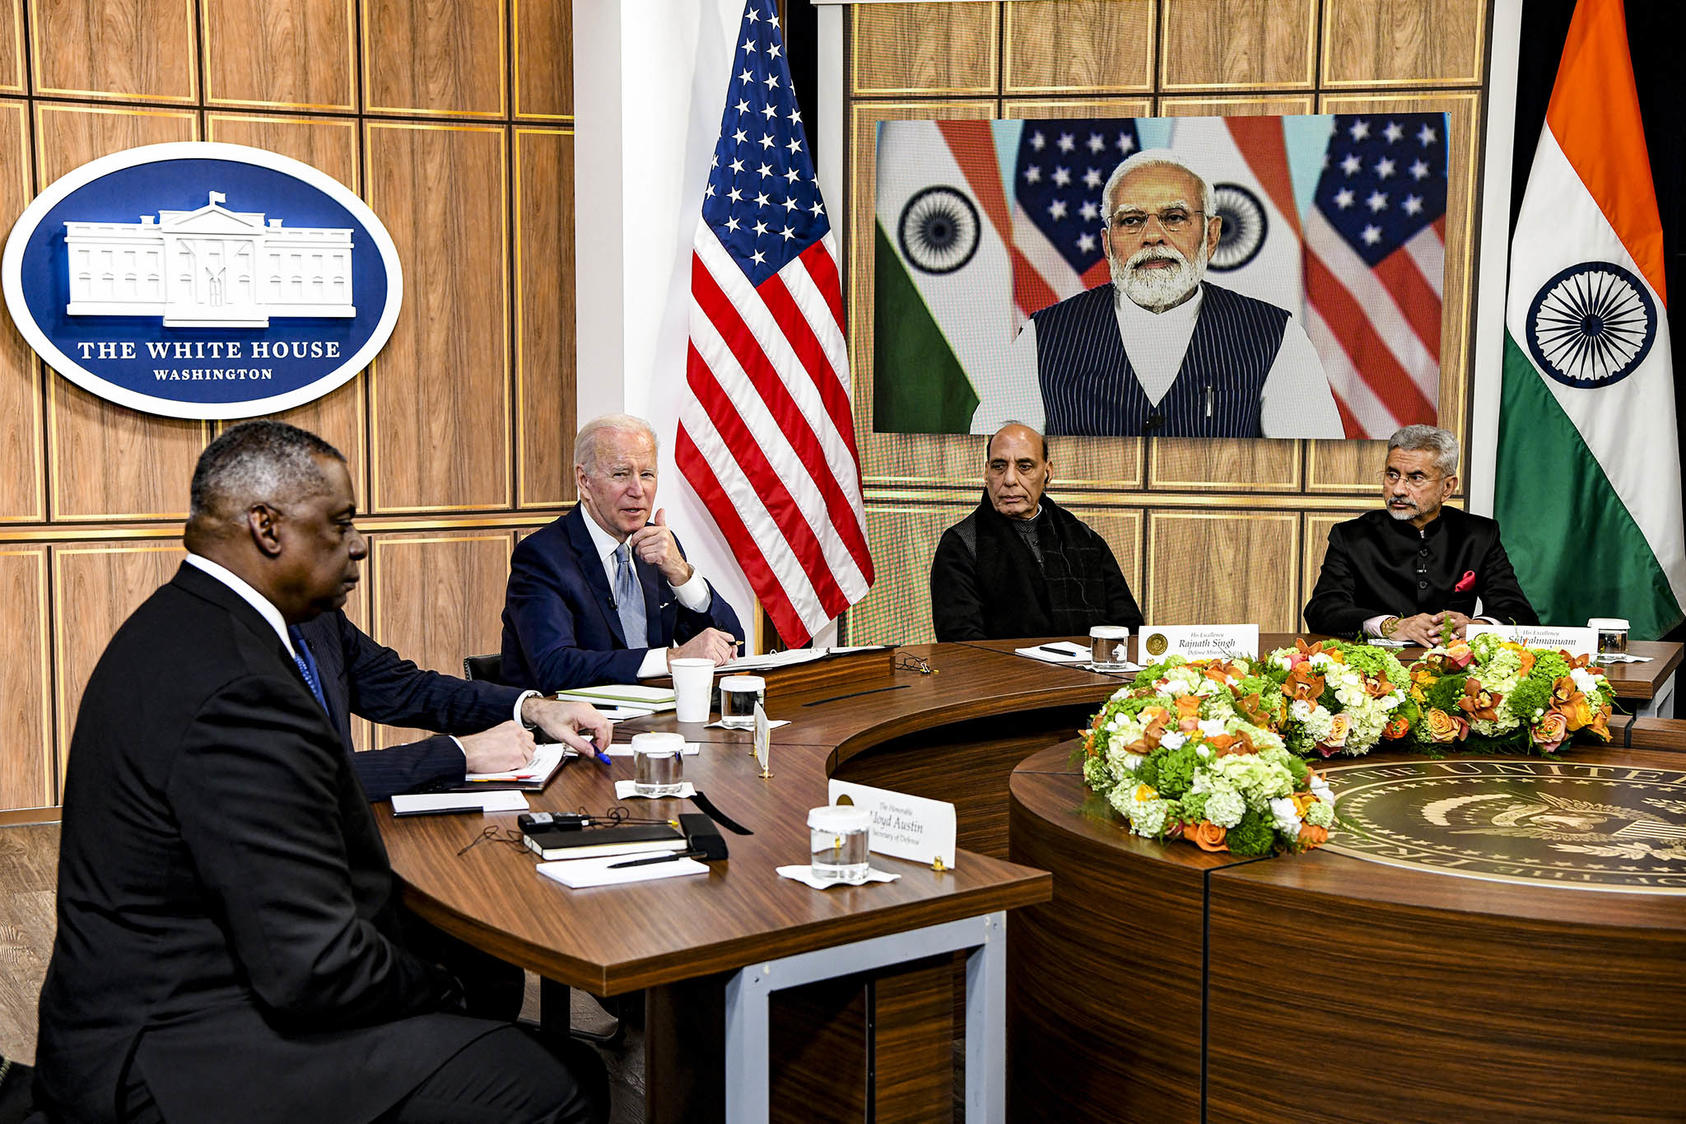 President Biden meeting with Indian Prime Minister Narendra Modi, April 11, 2022, joined by Defense Secretary Lloyd Austin and Indian Defense Minister Rajnath Singh and External Affairs Minister Subrahmanyam Jaishankar. (Kenny Holston/The New York Times)